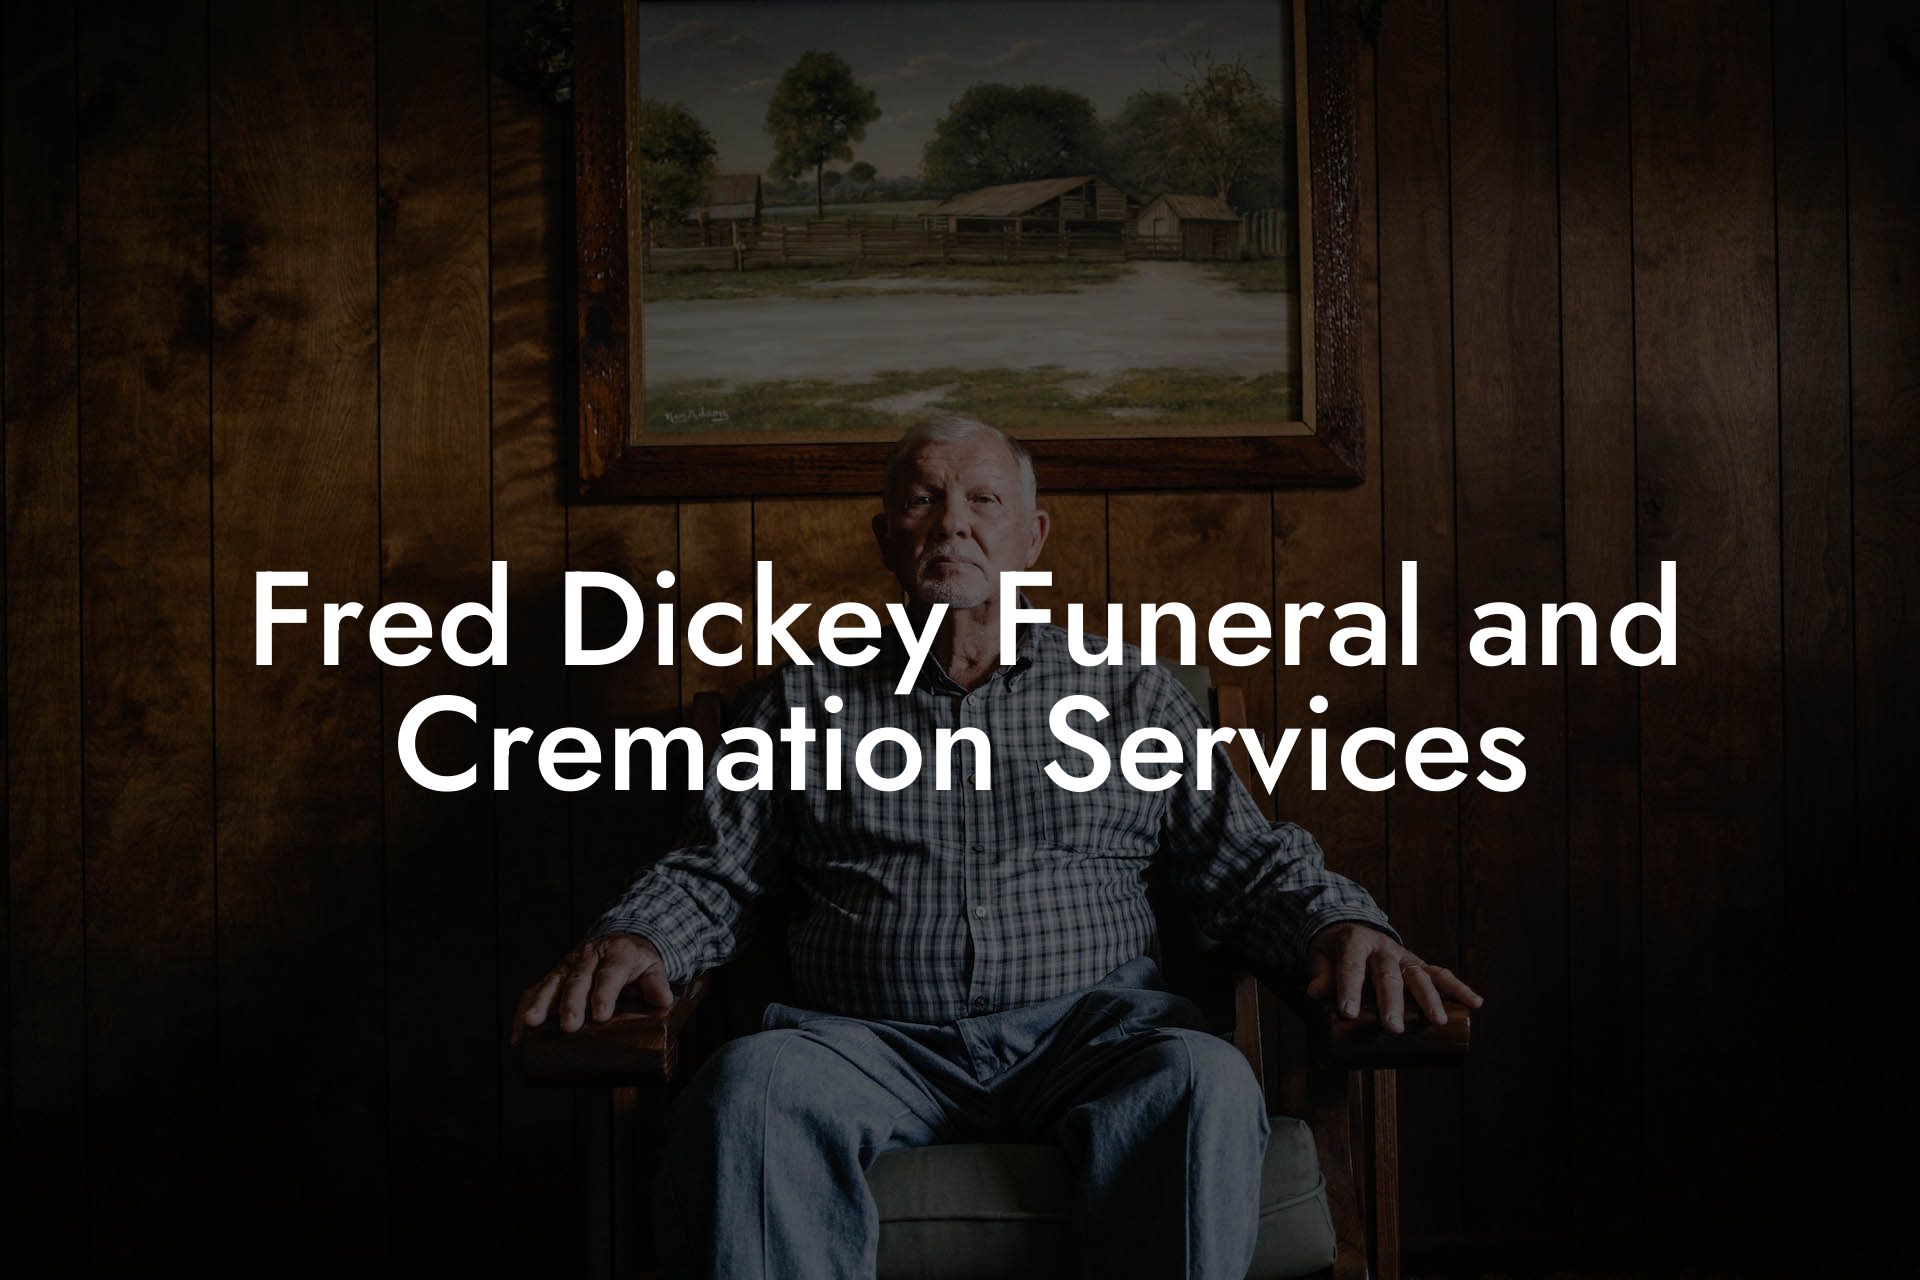 Fred Dickey Funeral and Cremation Services